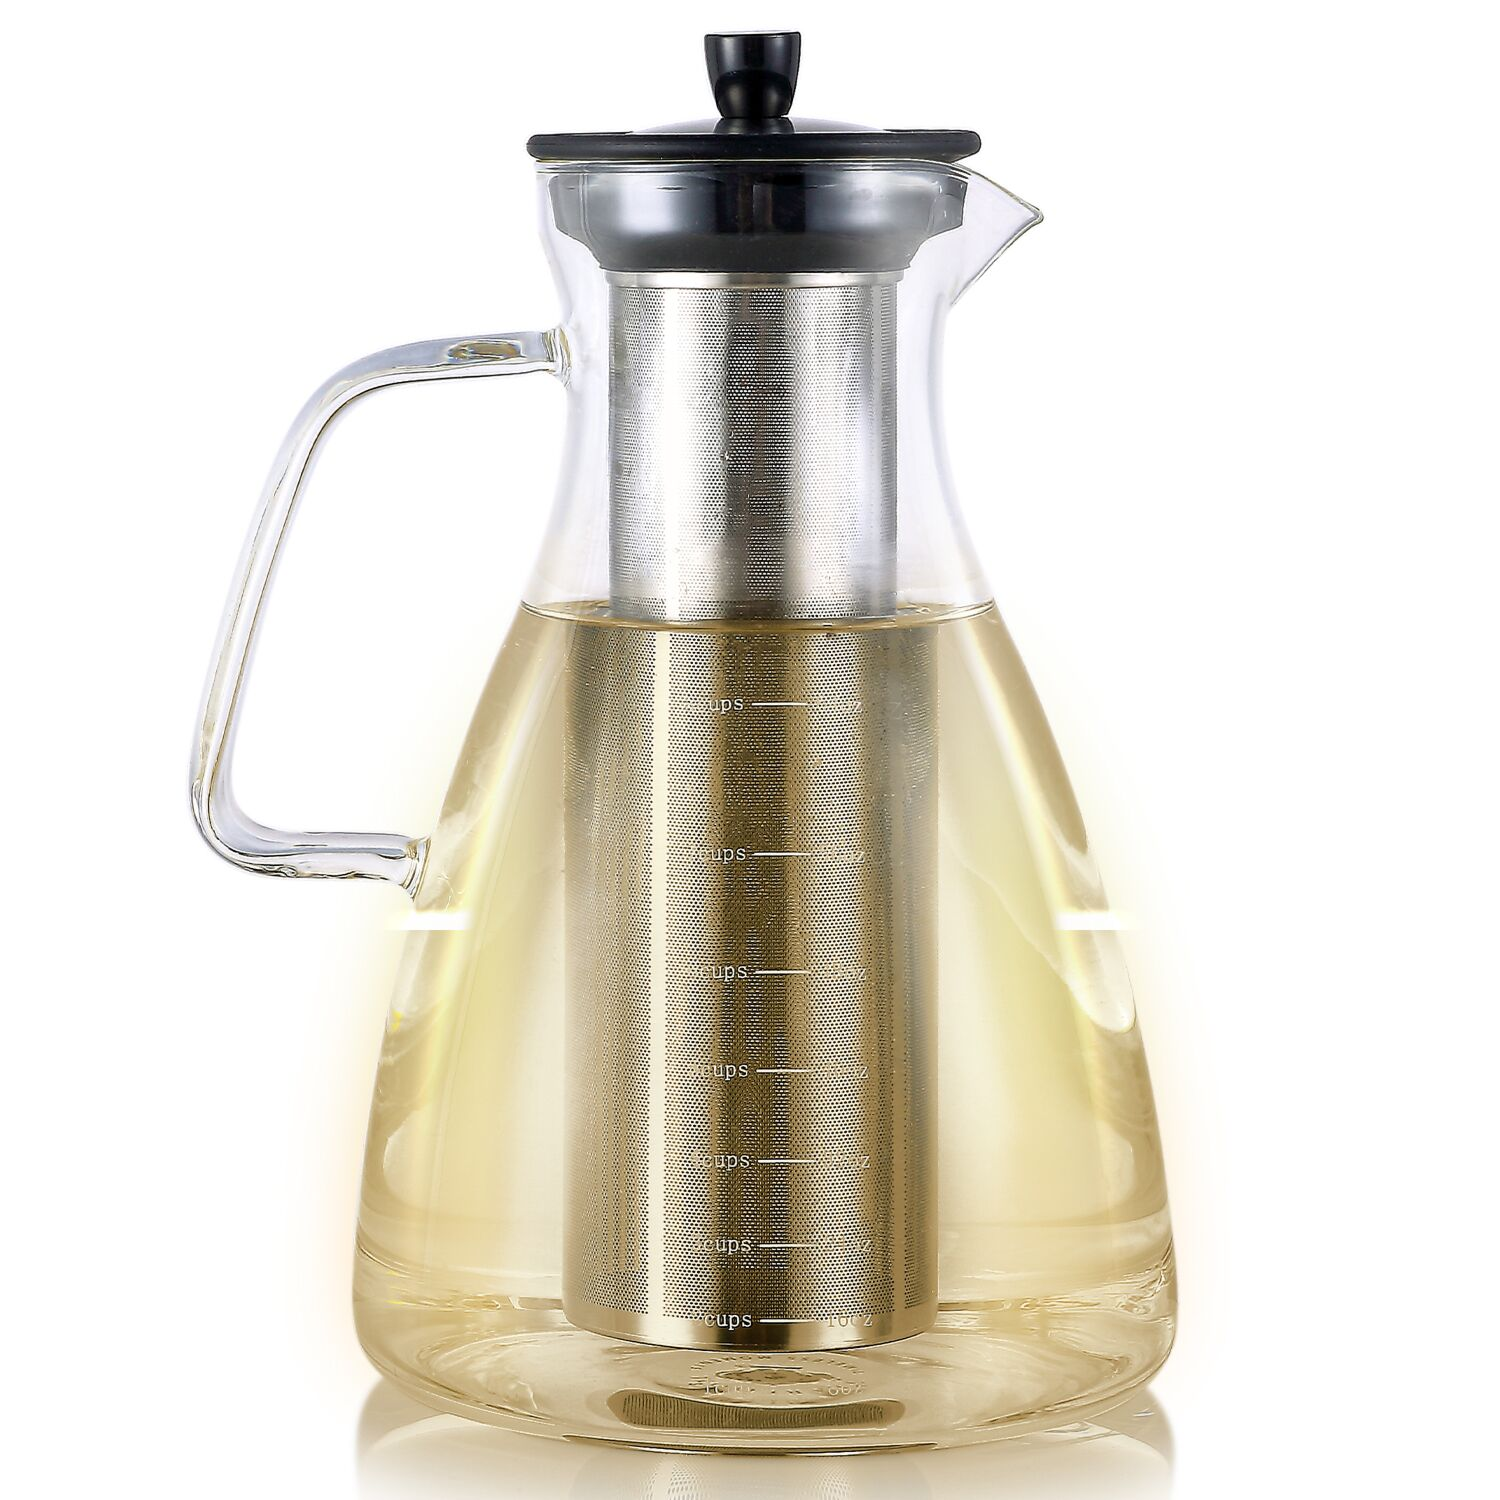 Teabloom tea accessories All Brew Beverage Maker for tea and coffee